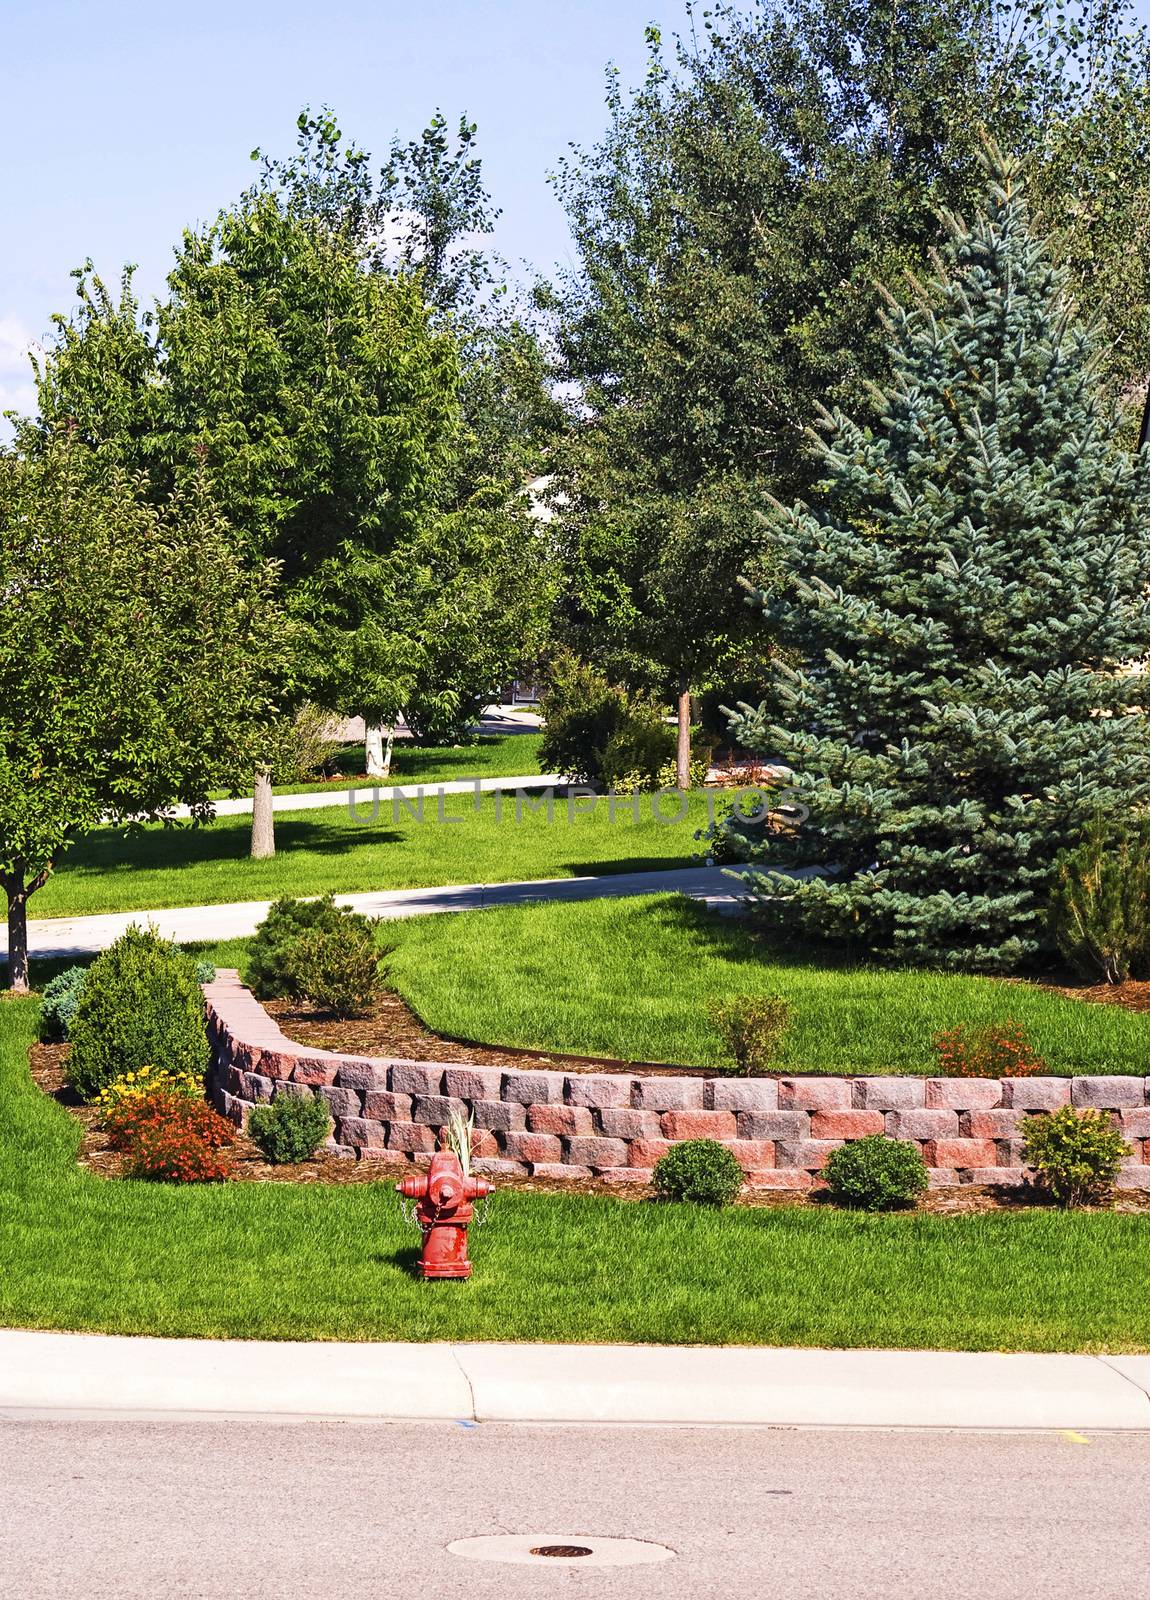 Well manicured yard with a retaining wall on a corner lot located in a suburban neighborhood.